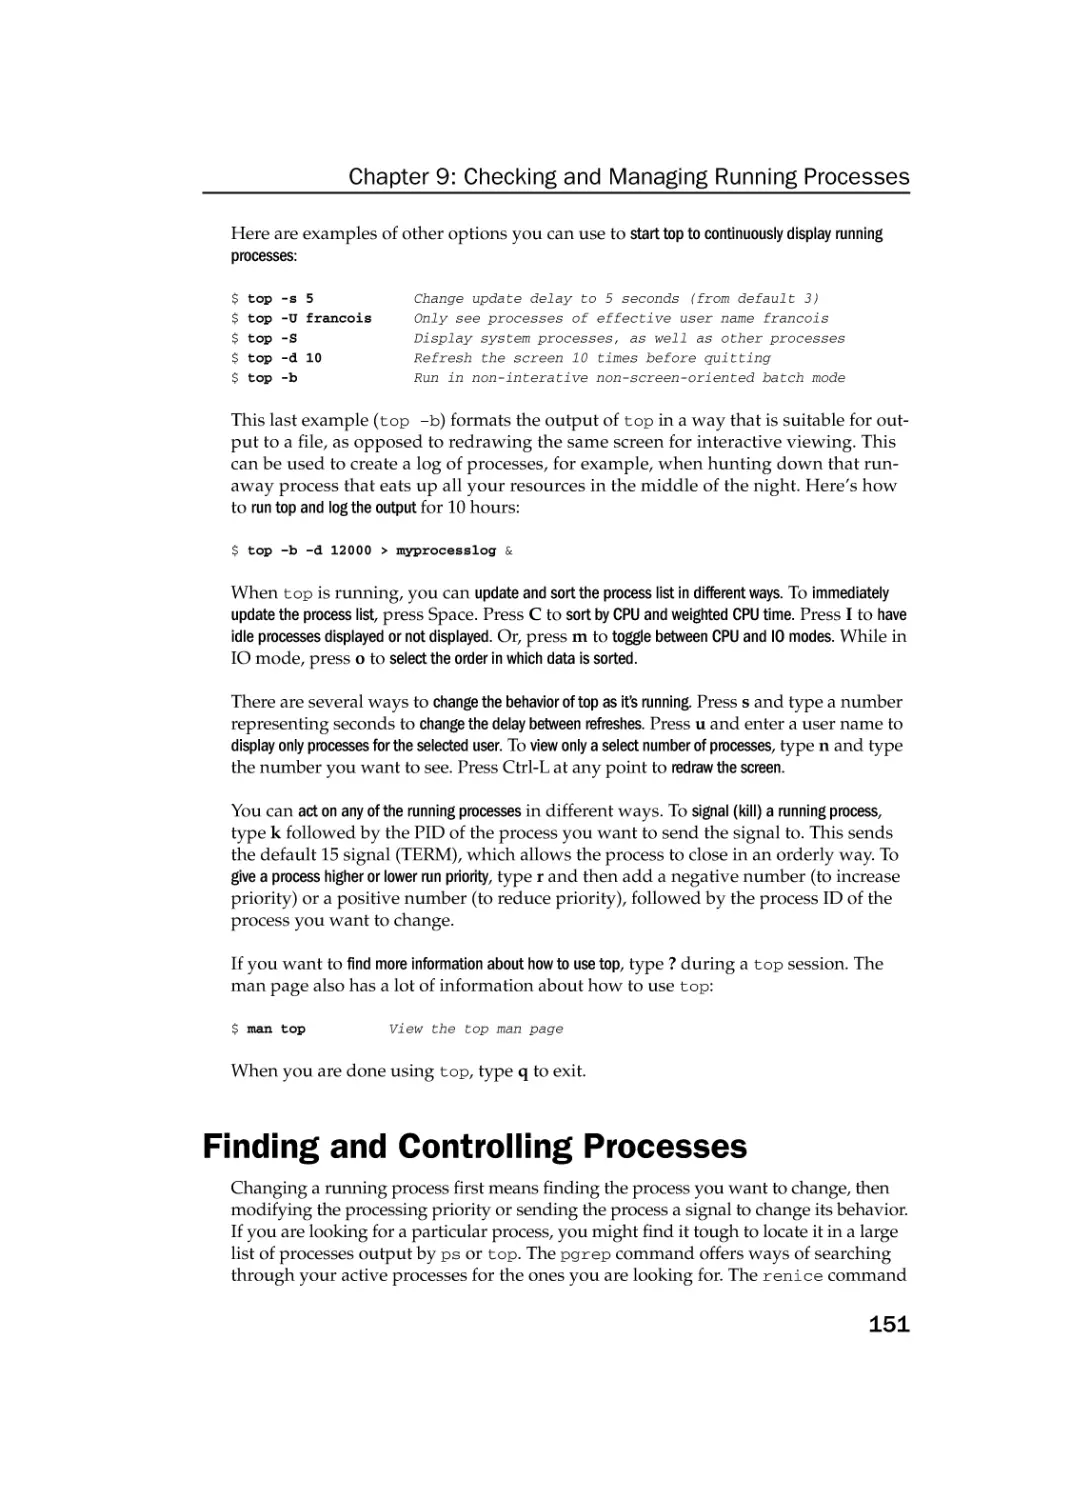 Finding and Controlling Processes